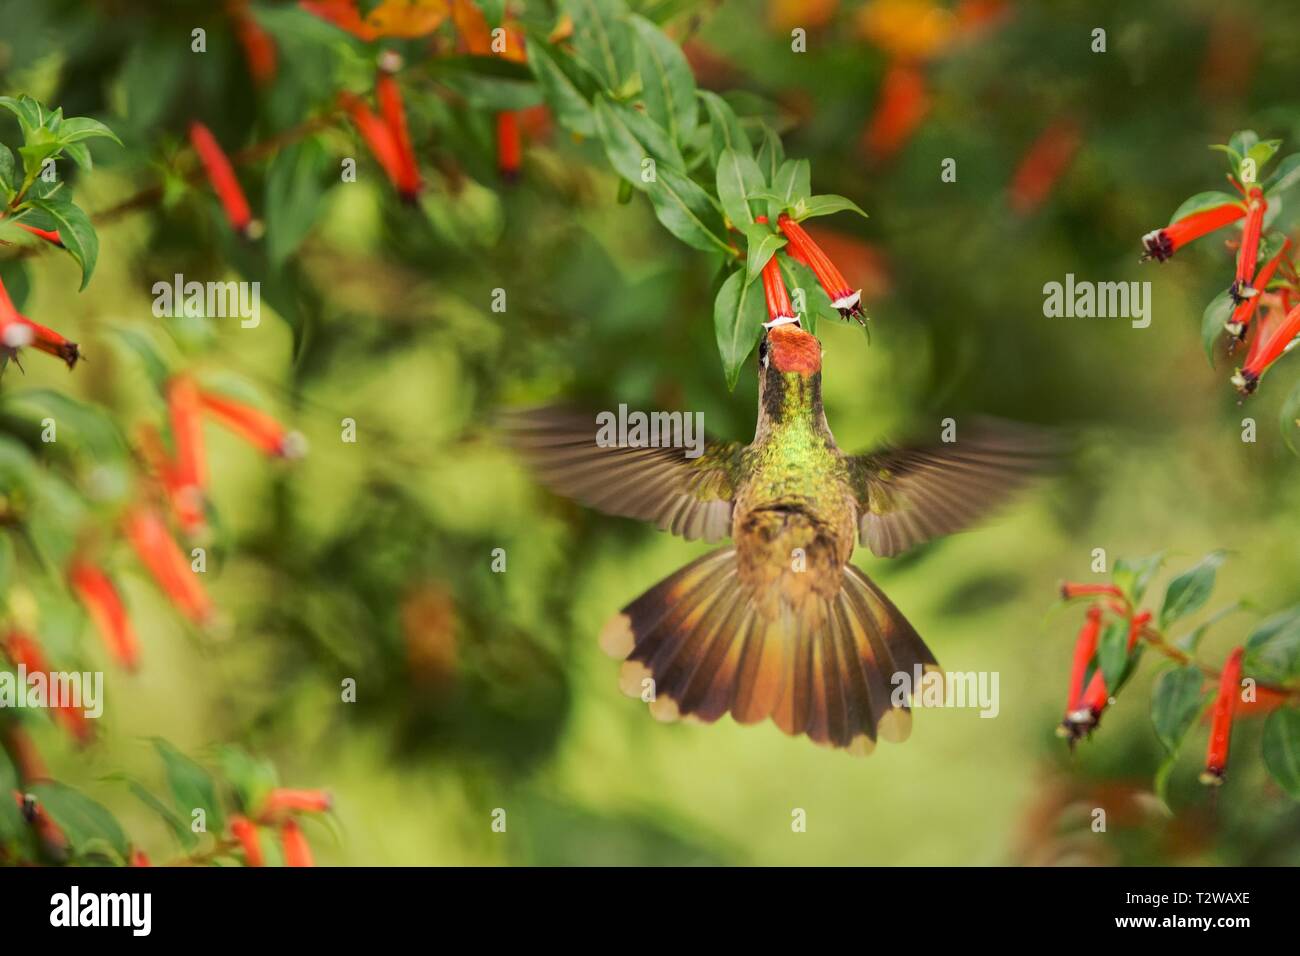 Endemic hummingbird hovering next to red flower in rain,tropical forest, Colombia, bird sucking nectar from blossom in garden,beautiful hummingbird wi Stock Photo